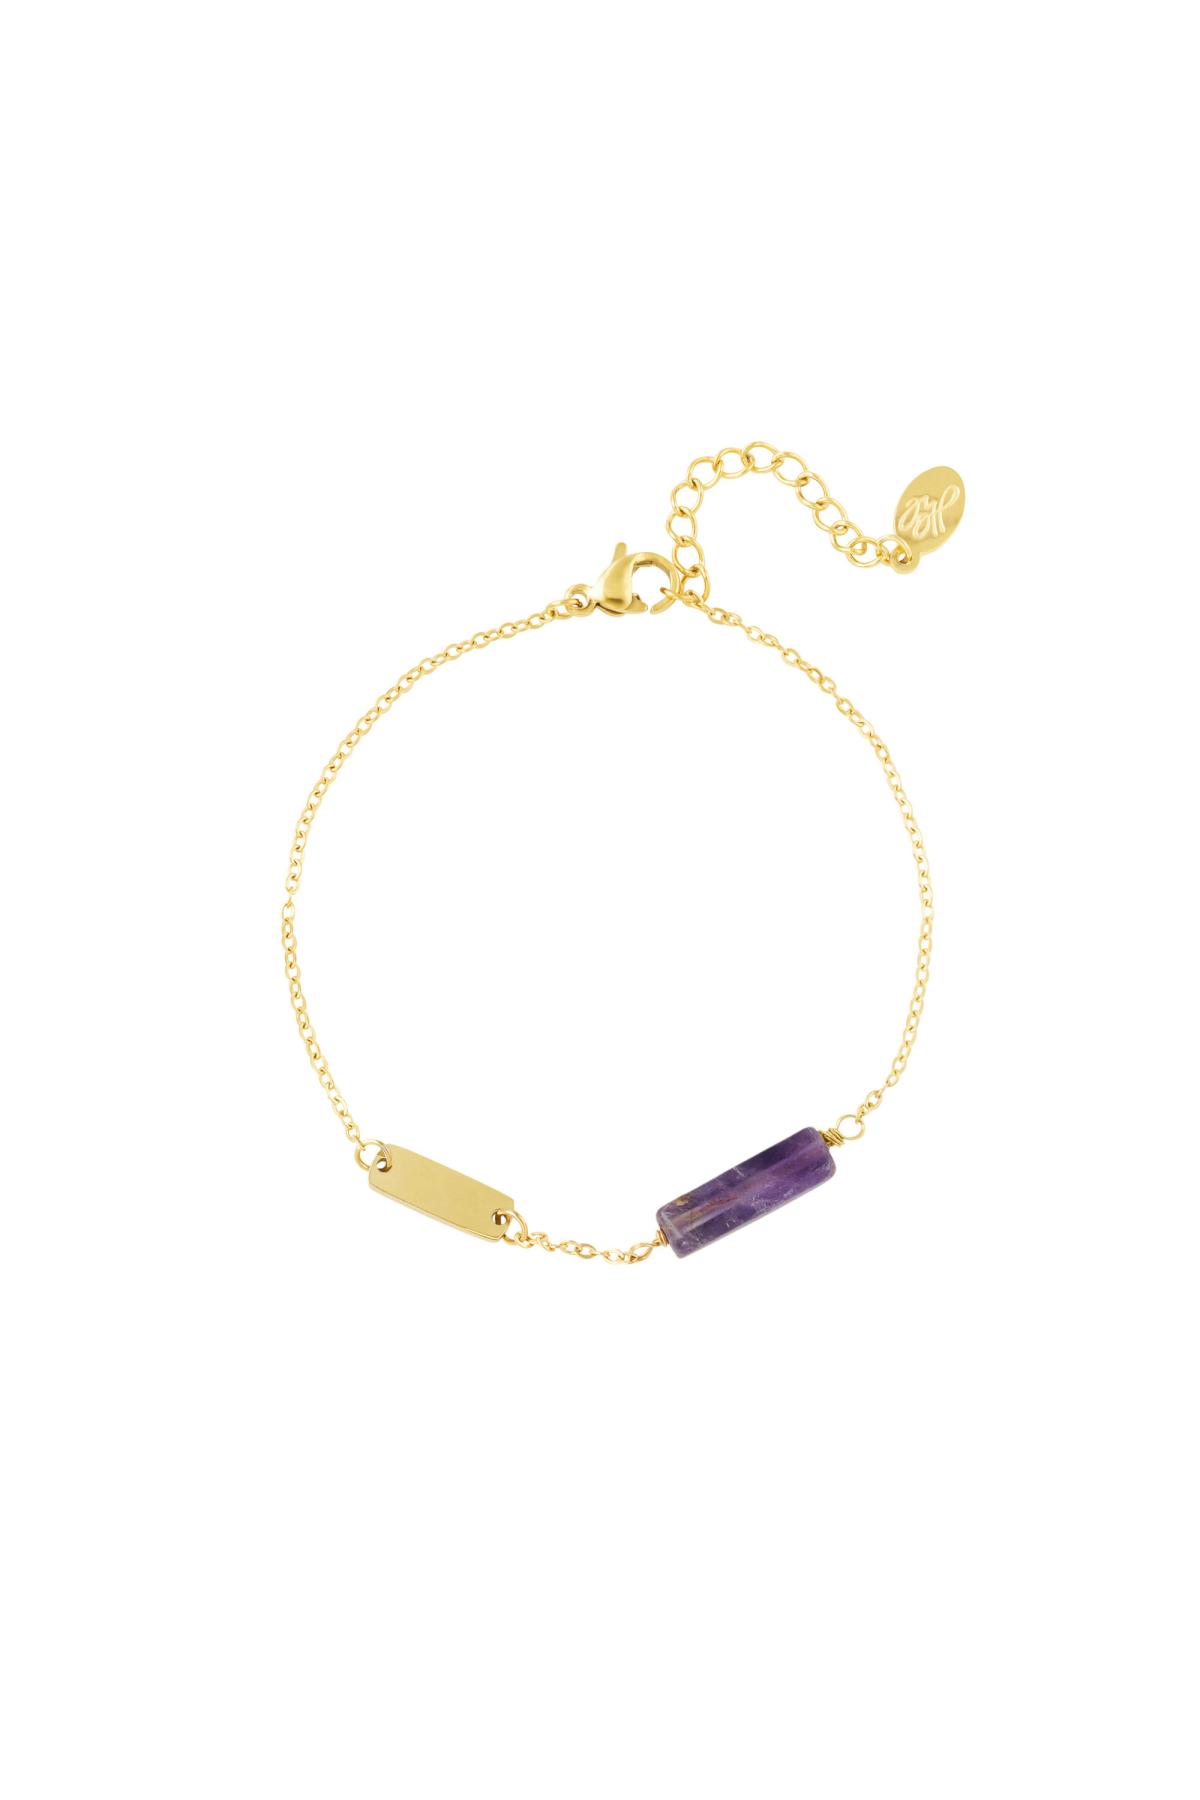 Basic bracelet with stone - Natural stones collection Purple Stainless Steel